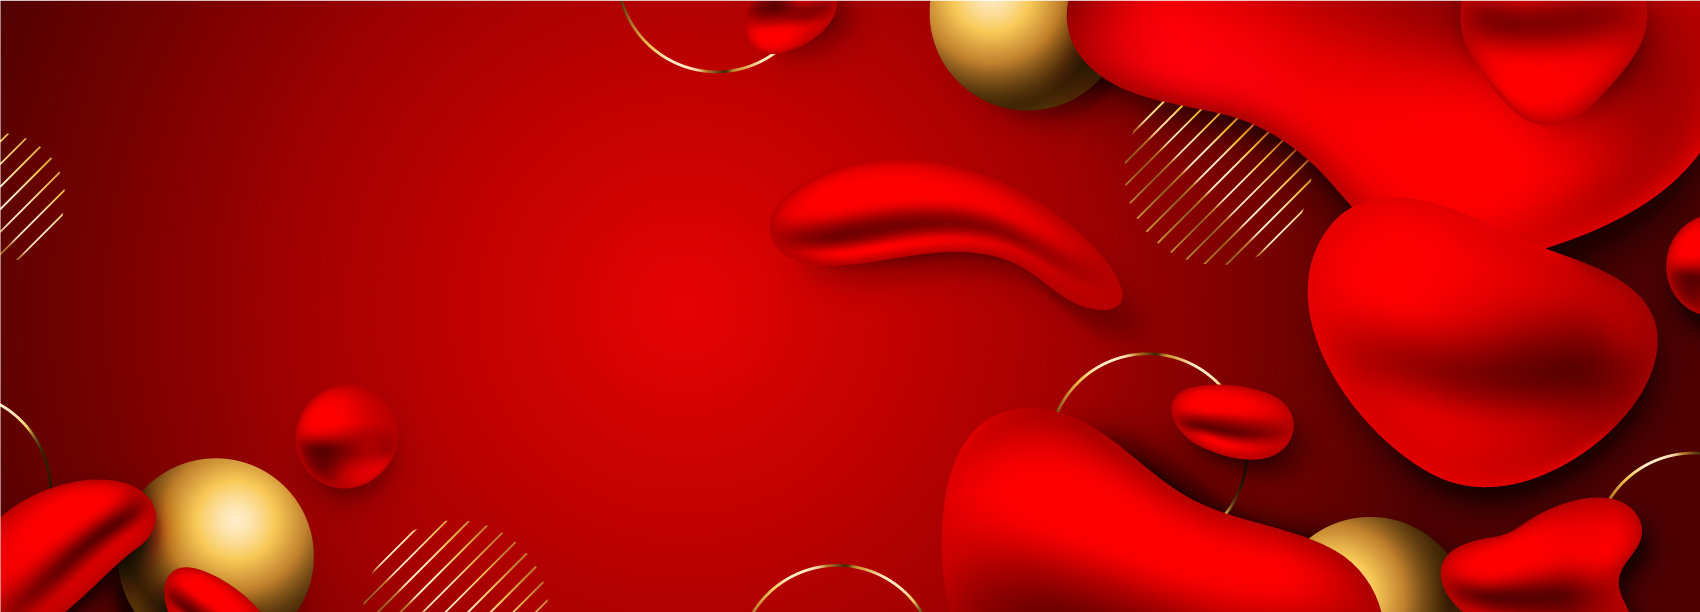 Red and Gold Liquid Long Banner Background